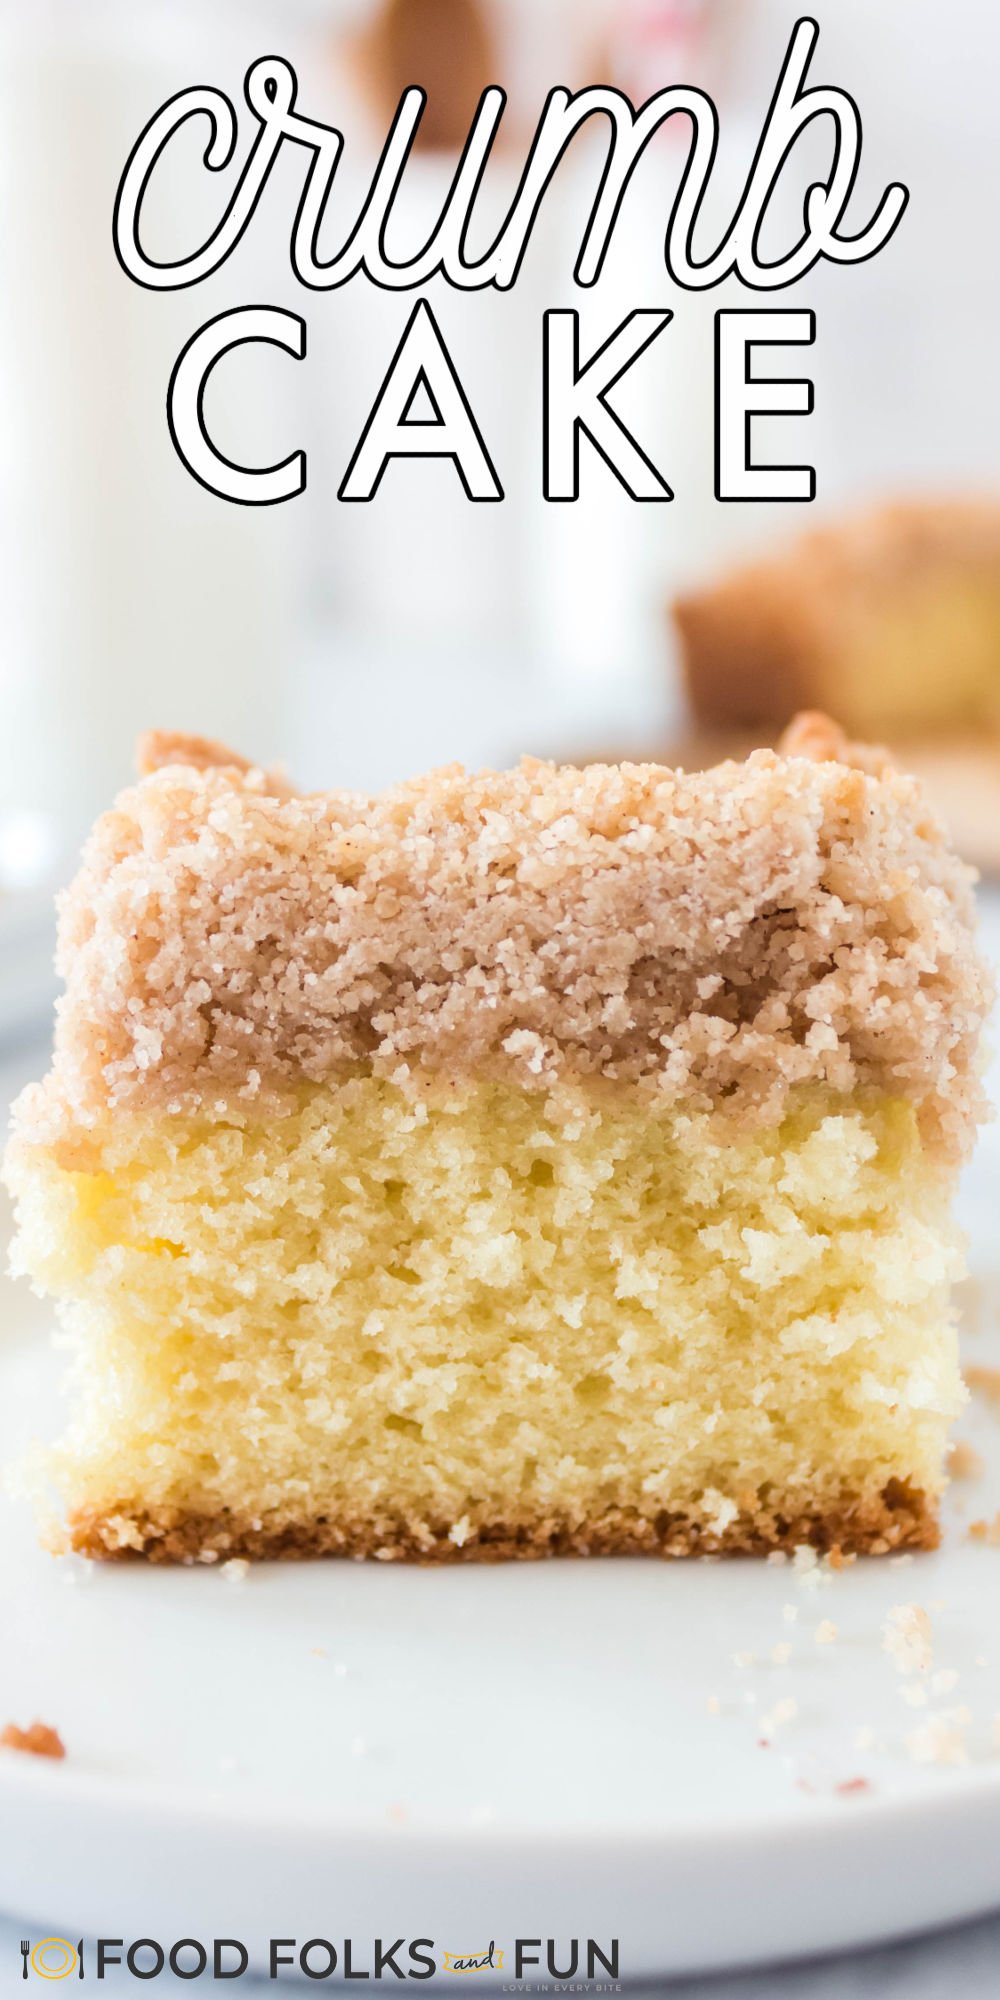 This Cinnamon Crumb Cake recipe is a breakfast classic. It has a rich, buttery, and tender cake crumb and a cinnamon crumb topping that is irresistible.  via @foodfolksandfun